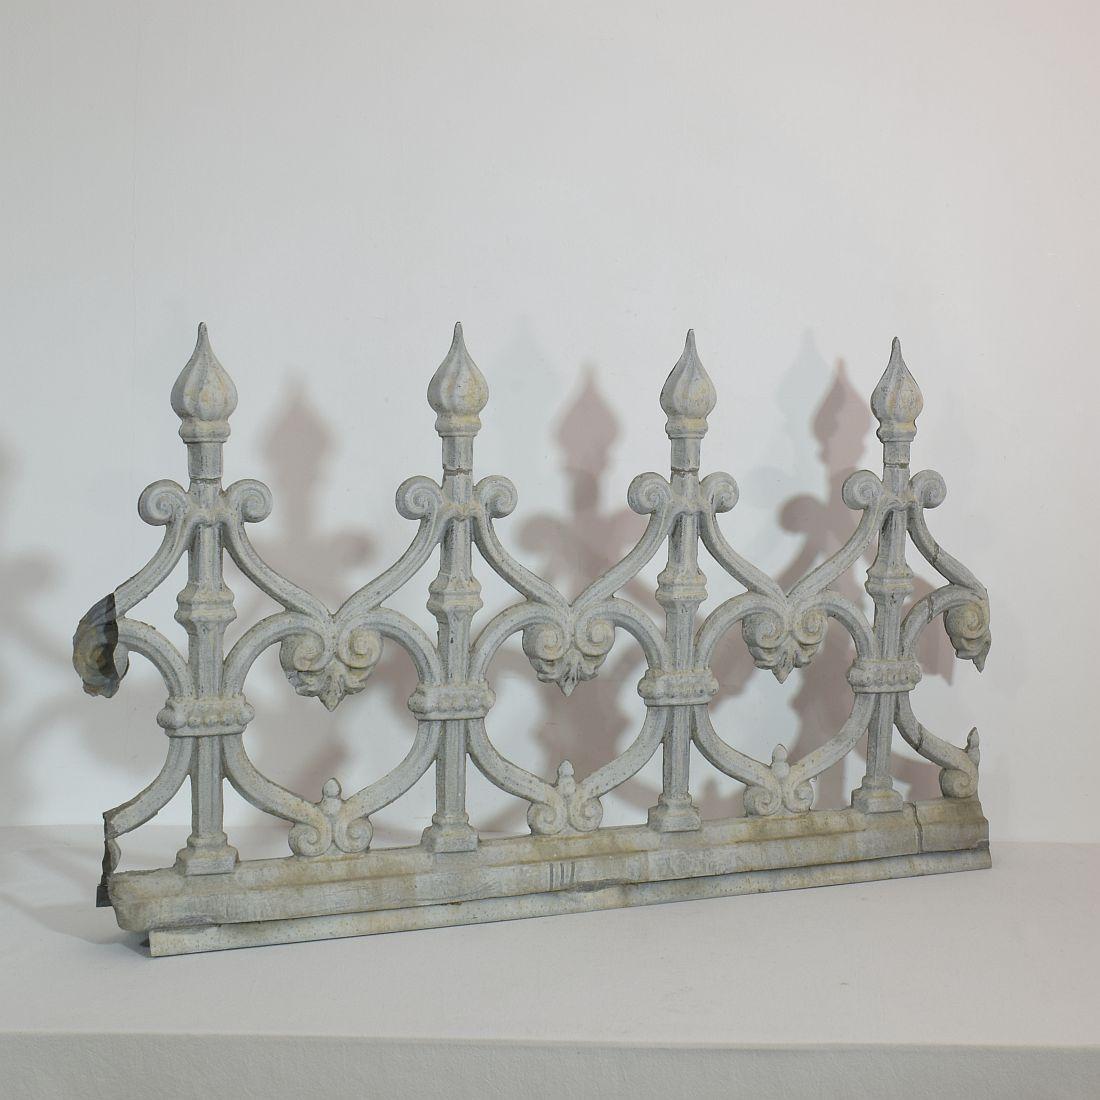 Belle Époque Pair of 19th Century French Zinc Architectural Roof Ornaments or Finials